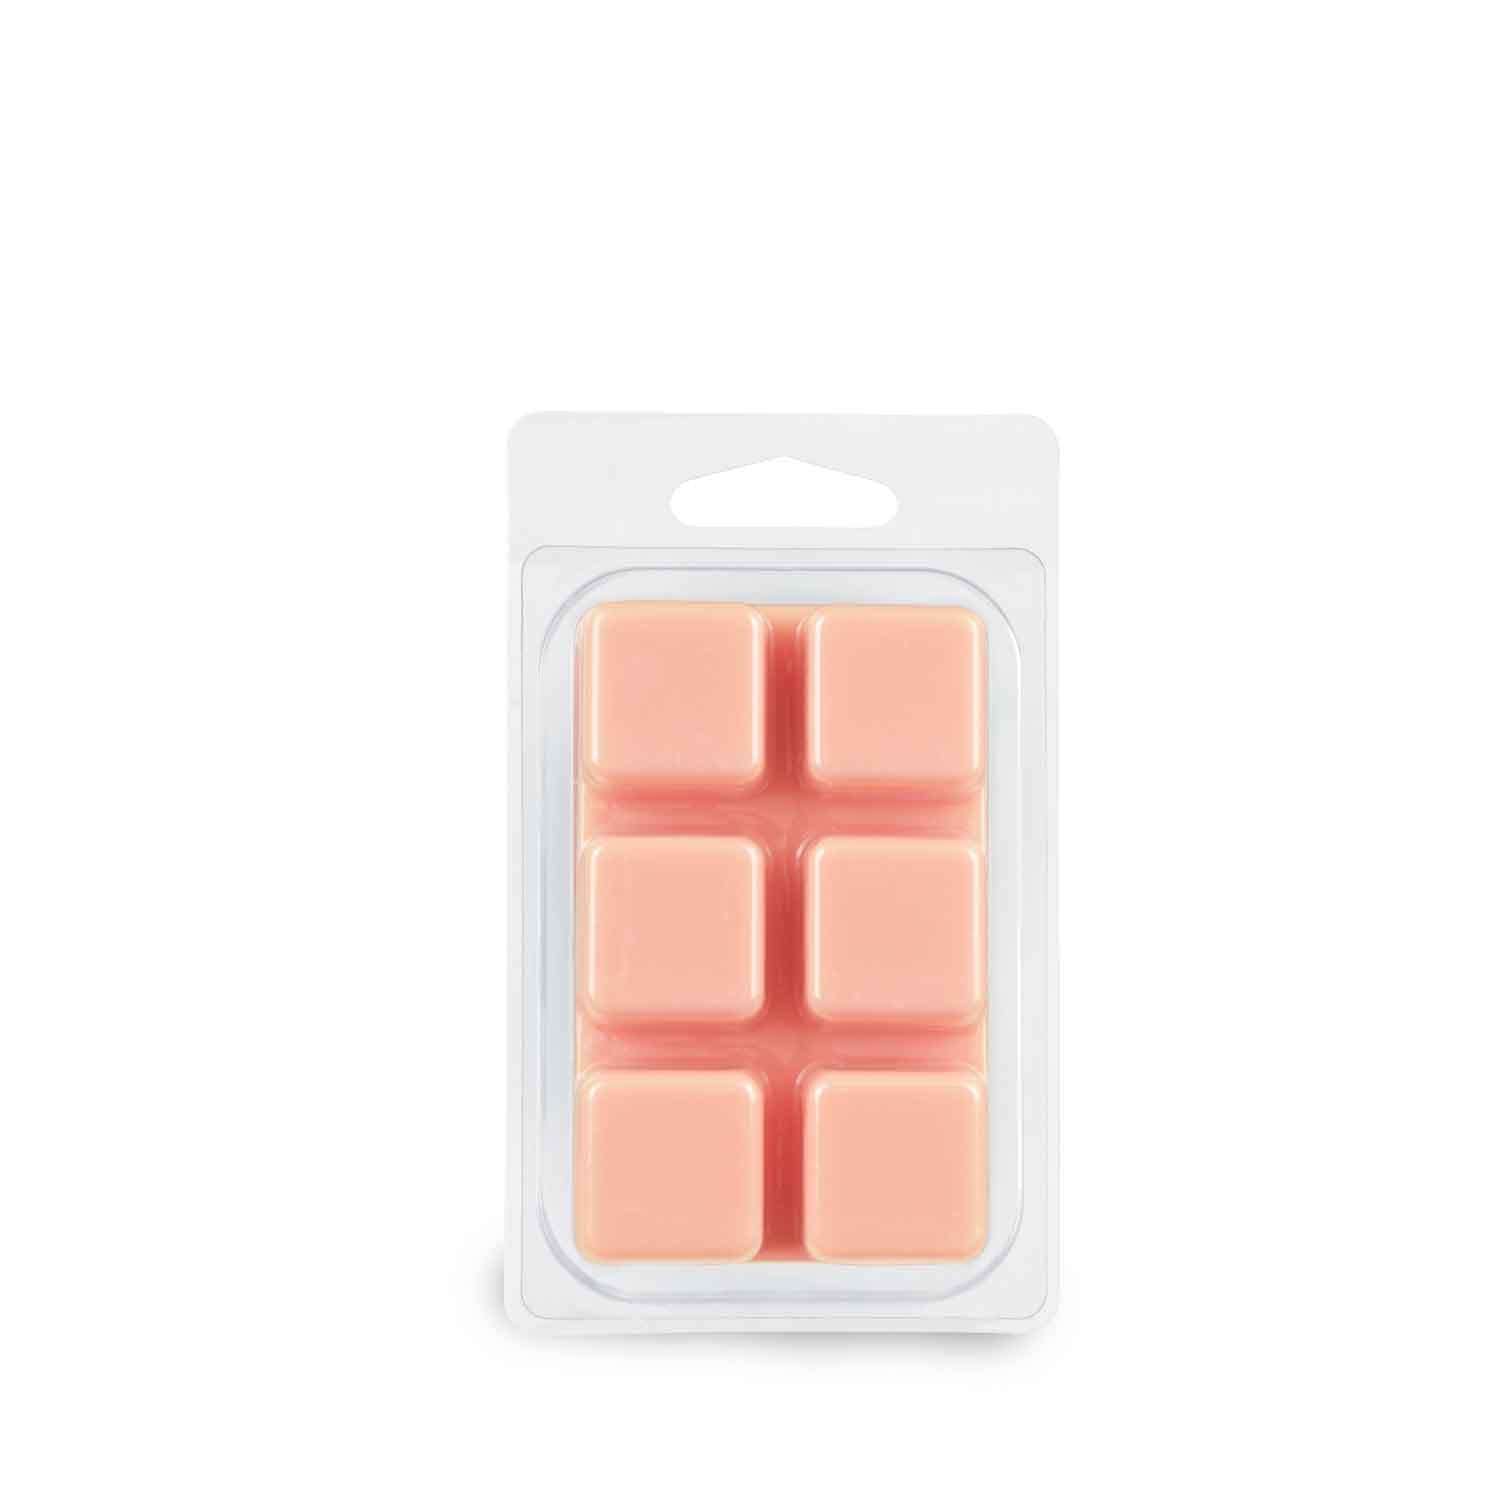 A set of Peach Prosecco scented wax melt tart bars in a Tuscany Candle® package.